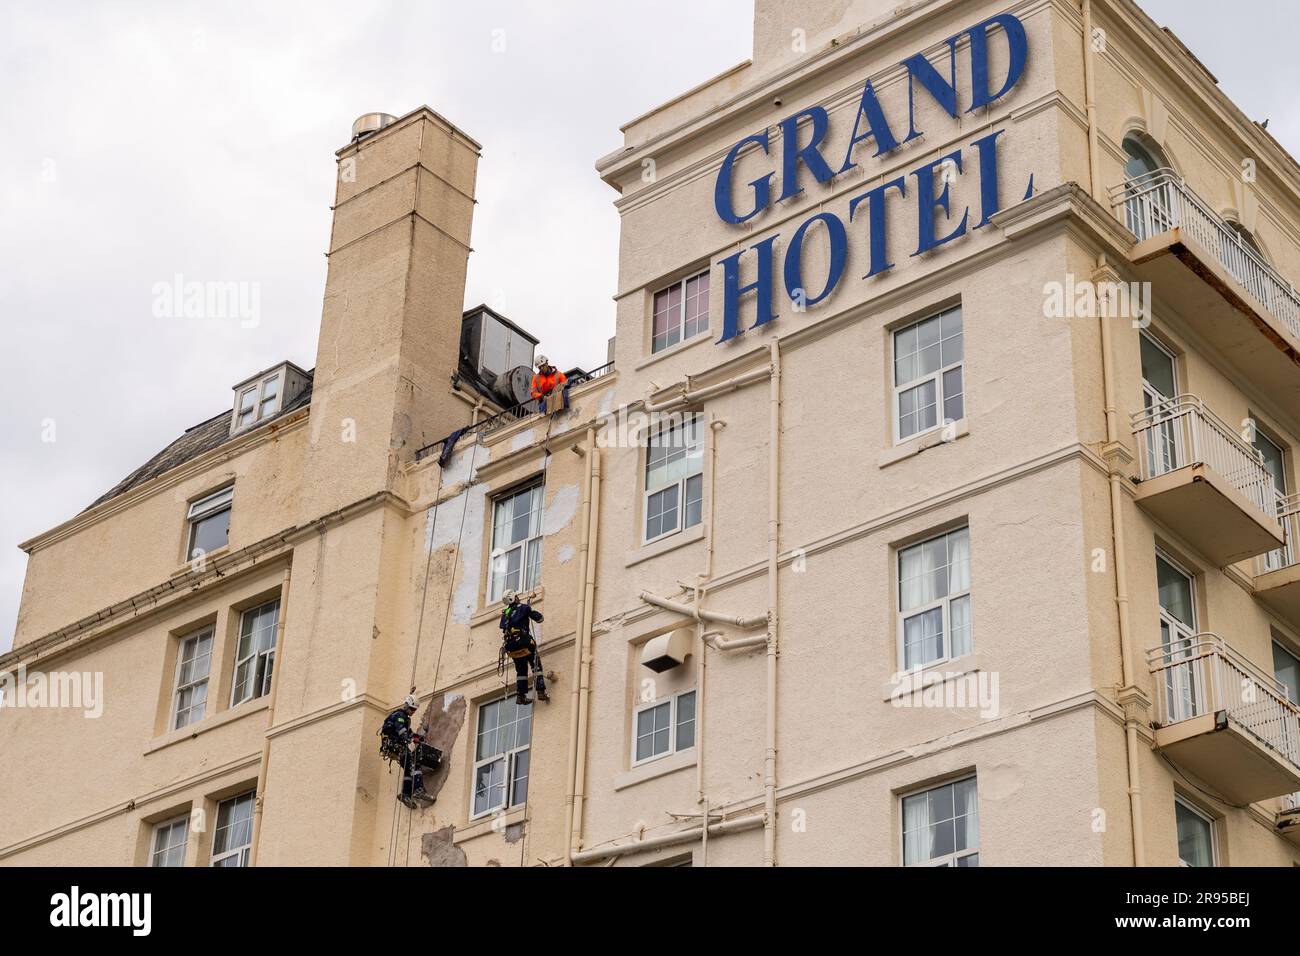 Specialist painters and decorators paint the side of the Grand Hotel, Llandudno, North Wales, UK. Stock Photo